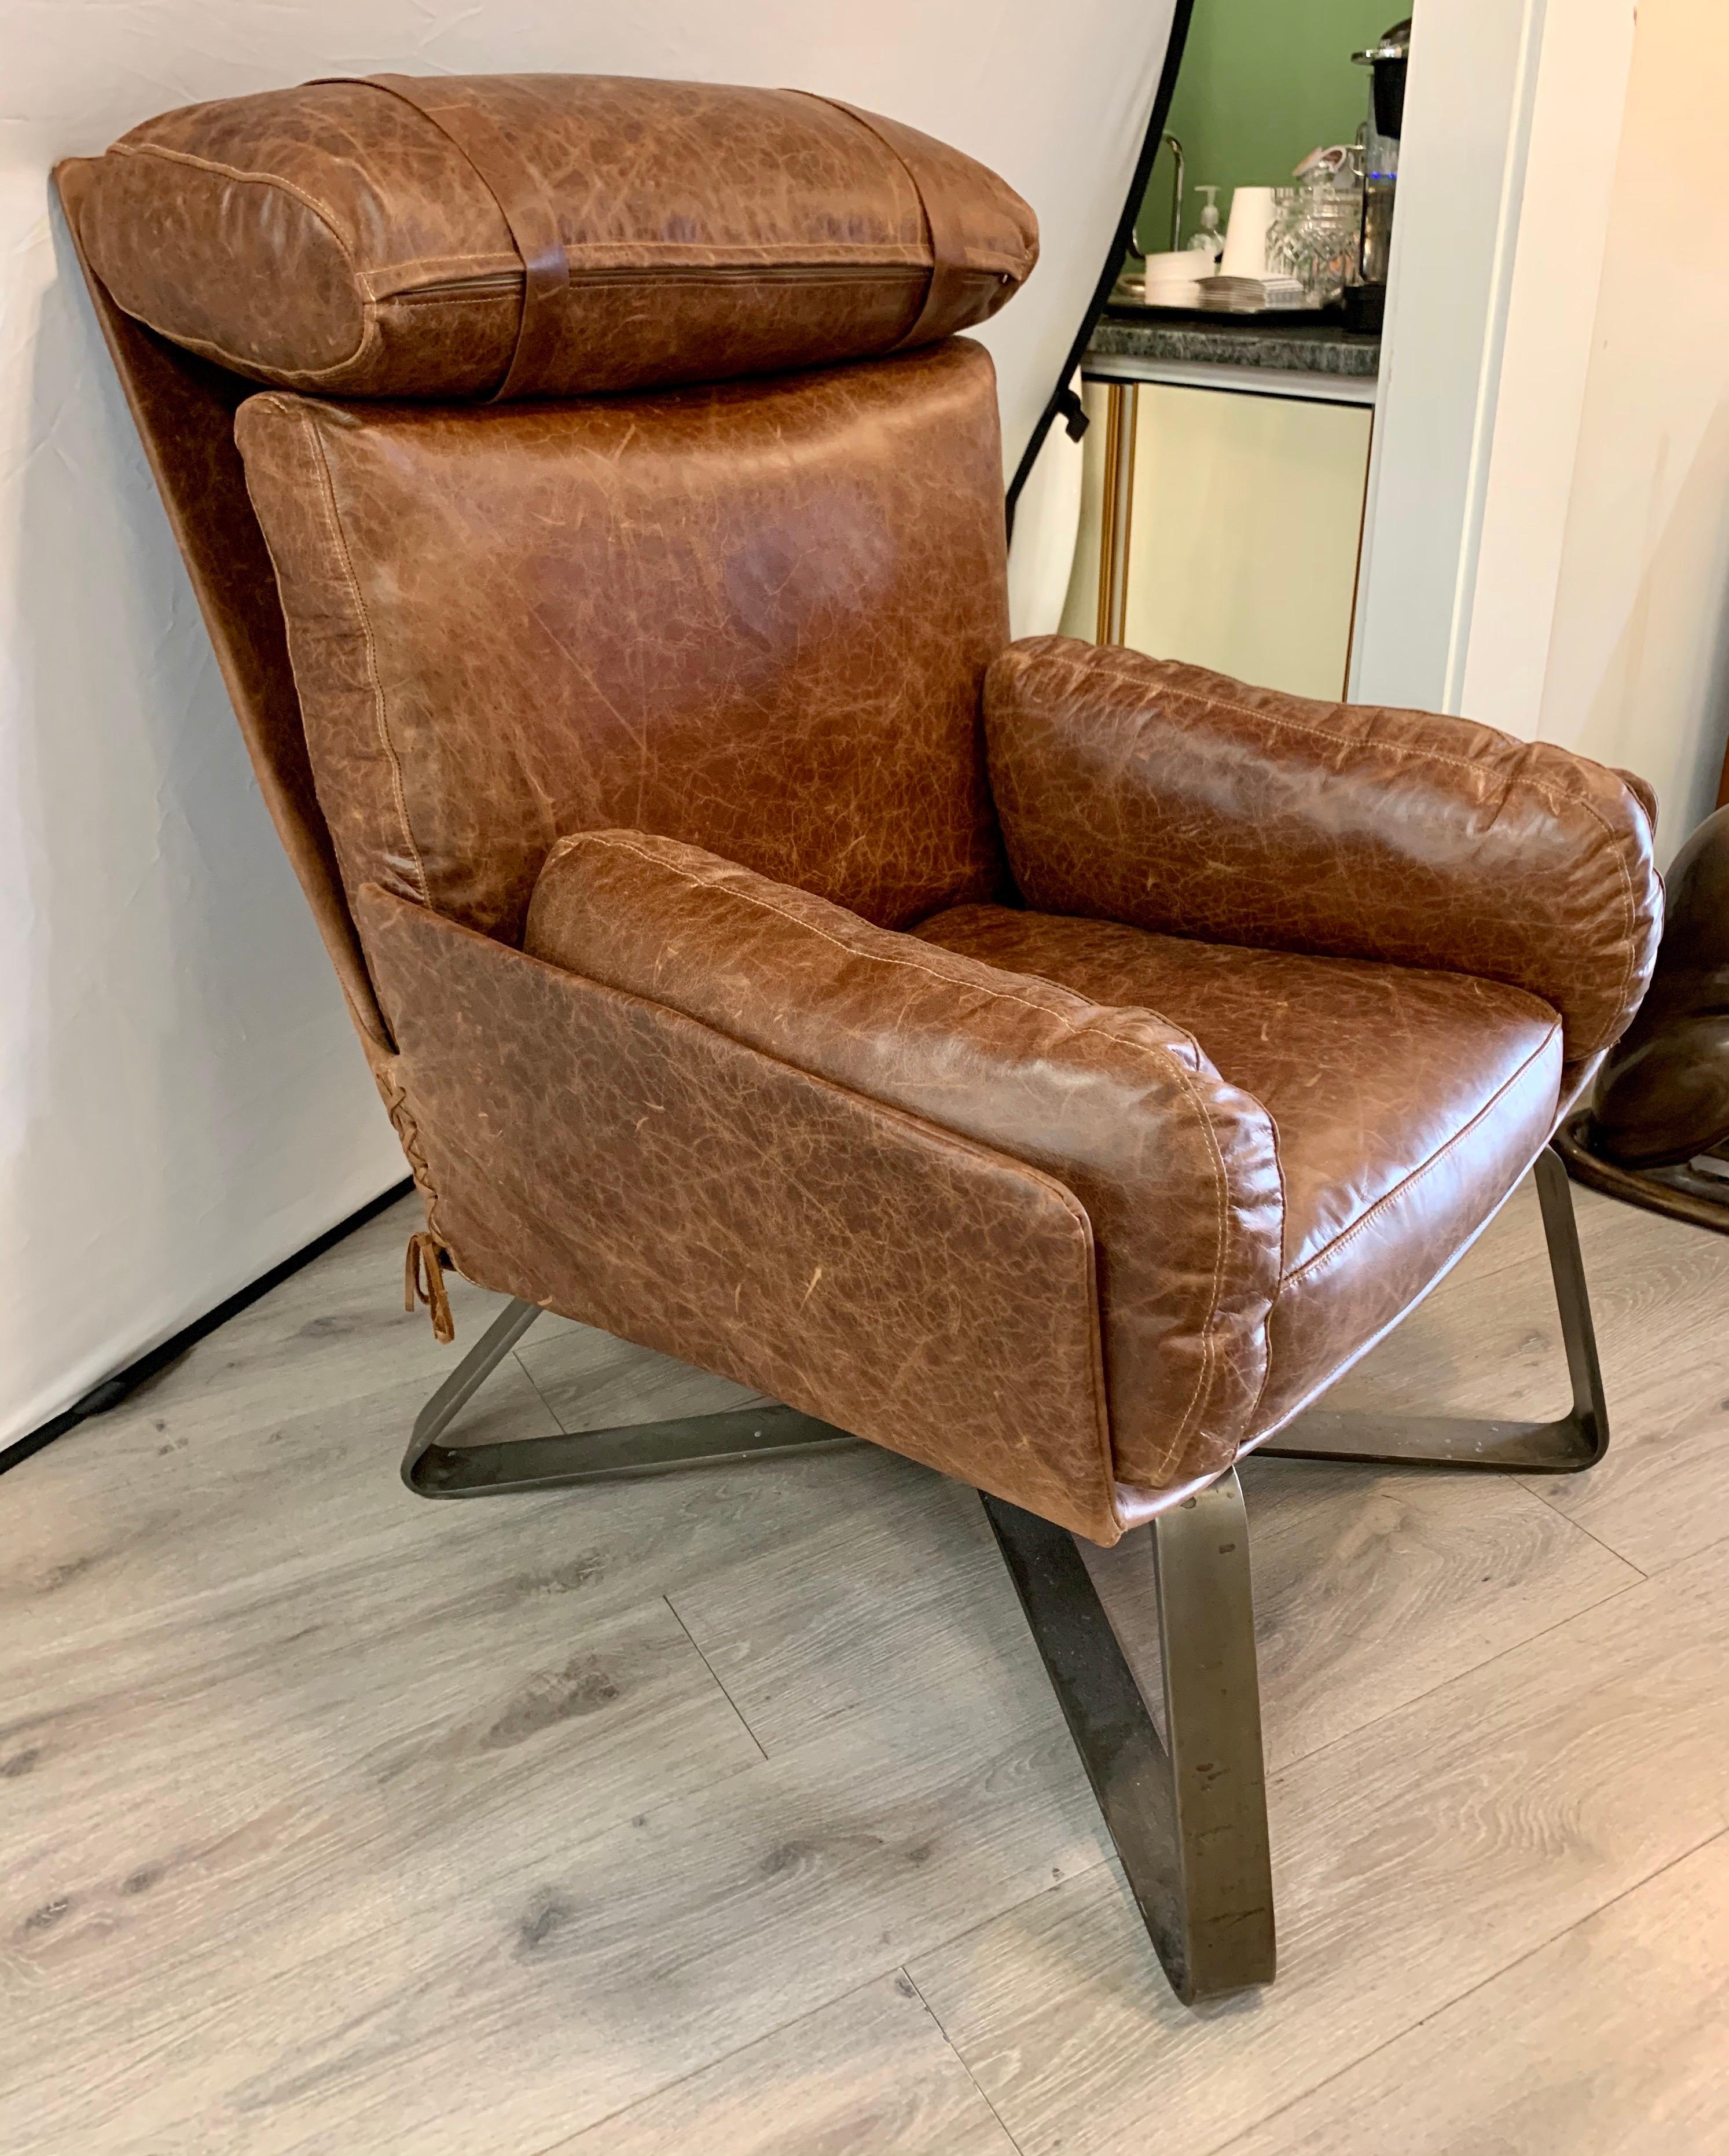 Elegant stitch brown leather chair. Stitching runs up the side. Features metal base. Now more than ever, home is where the heart is.